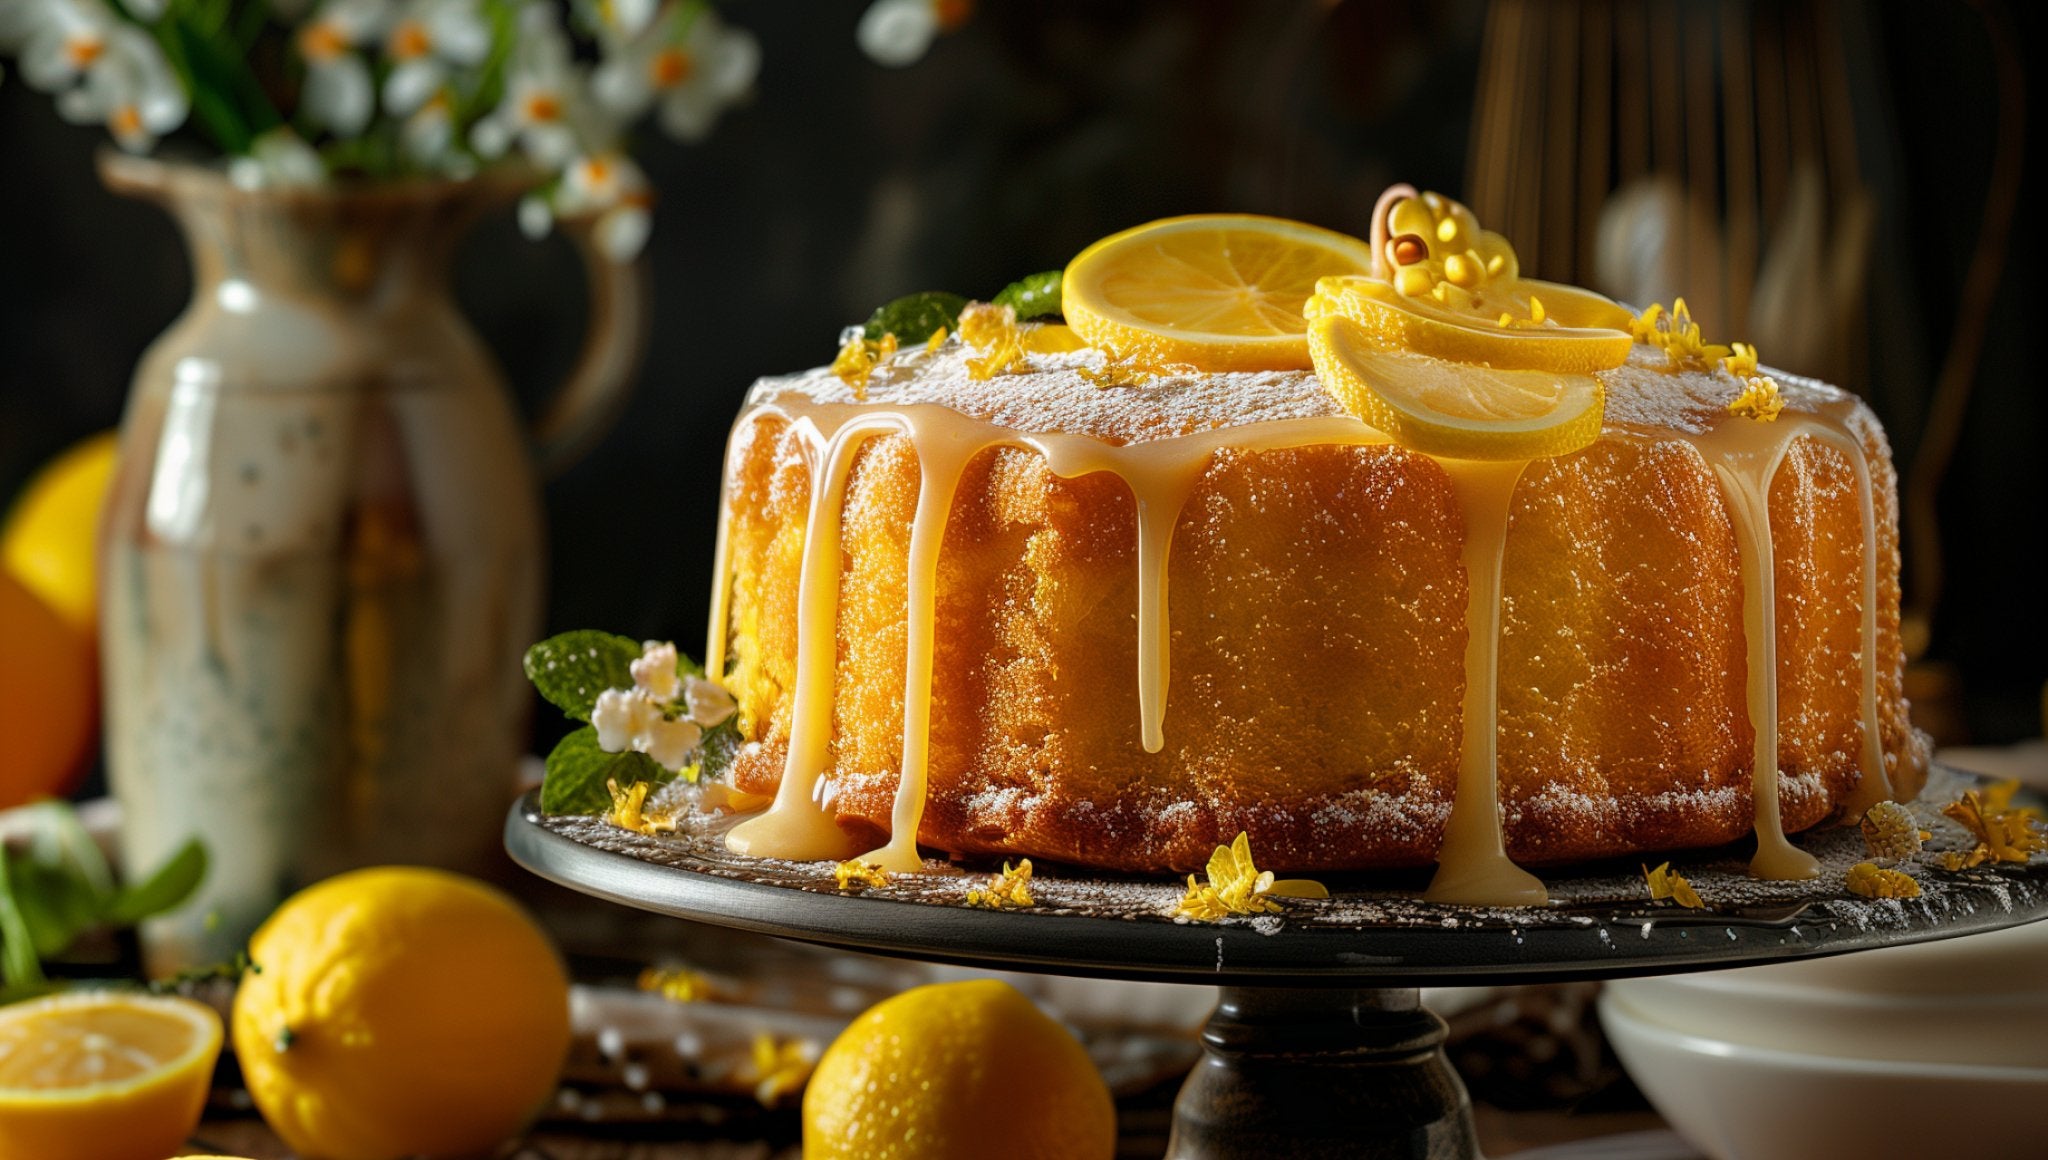 Gin and Lemon Drizzle Cake Recipe